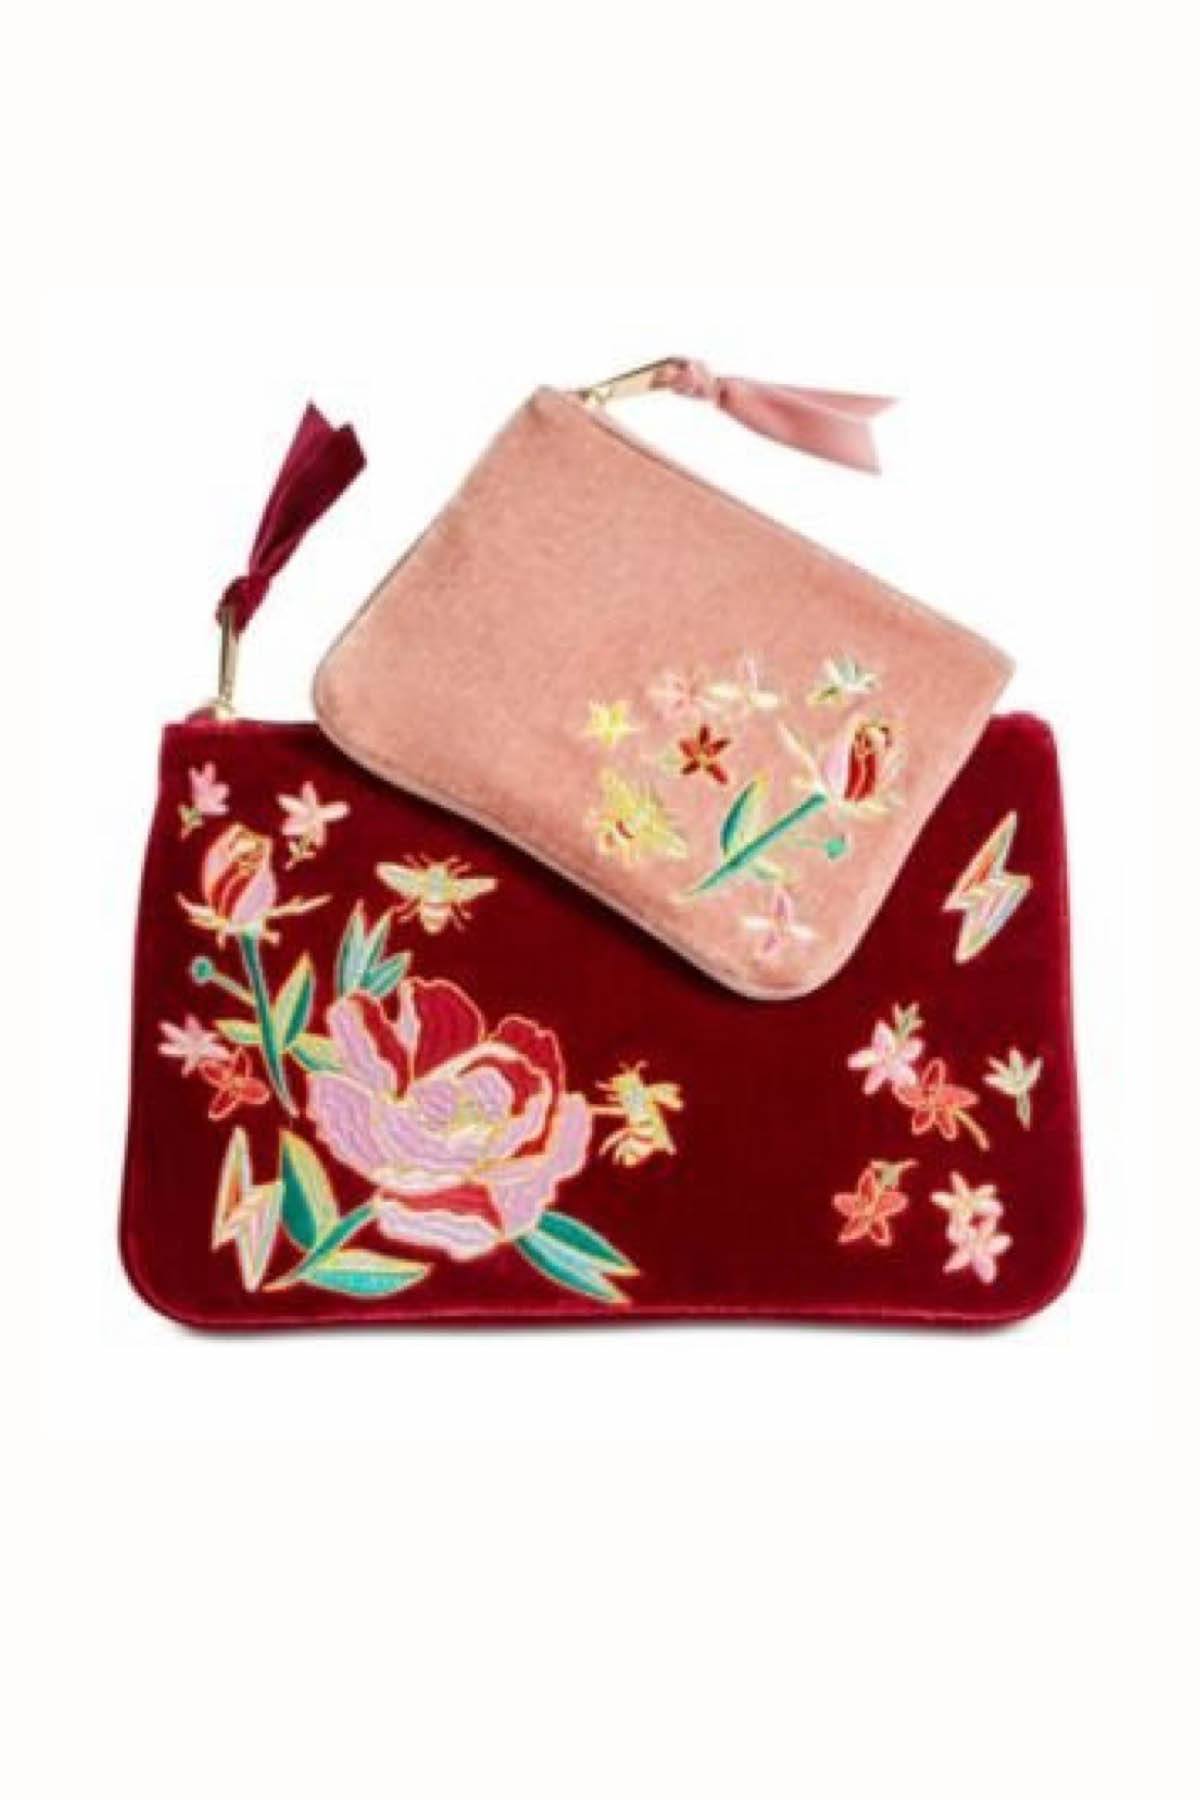 Celebrate Shop Maroon/Rose Embroidered Velvet Cosmetic Case 2-Pack